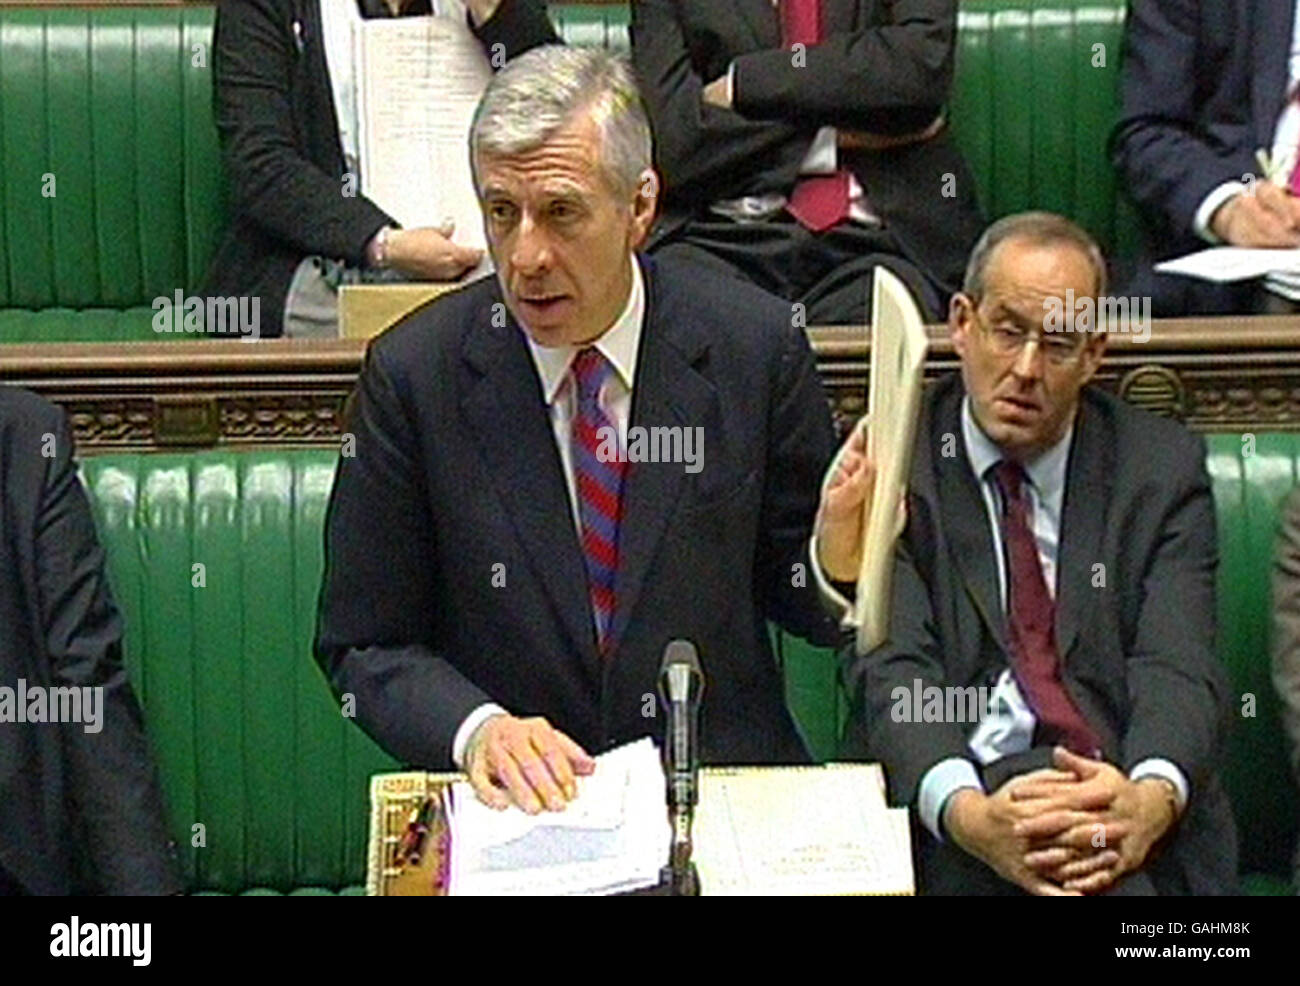 Justice Secretary Jack Straw makes a Commons statement on claims that a senior Muslim MP was bugged by police while meeting a constituent in prison at the House of Commons, London. Stock Photo